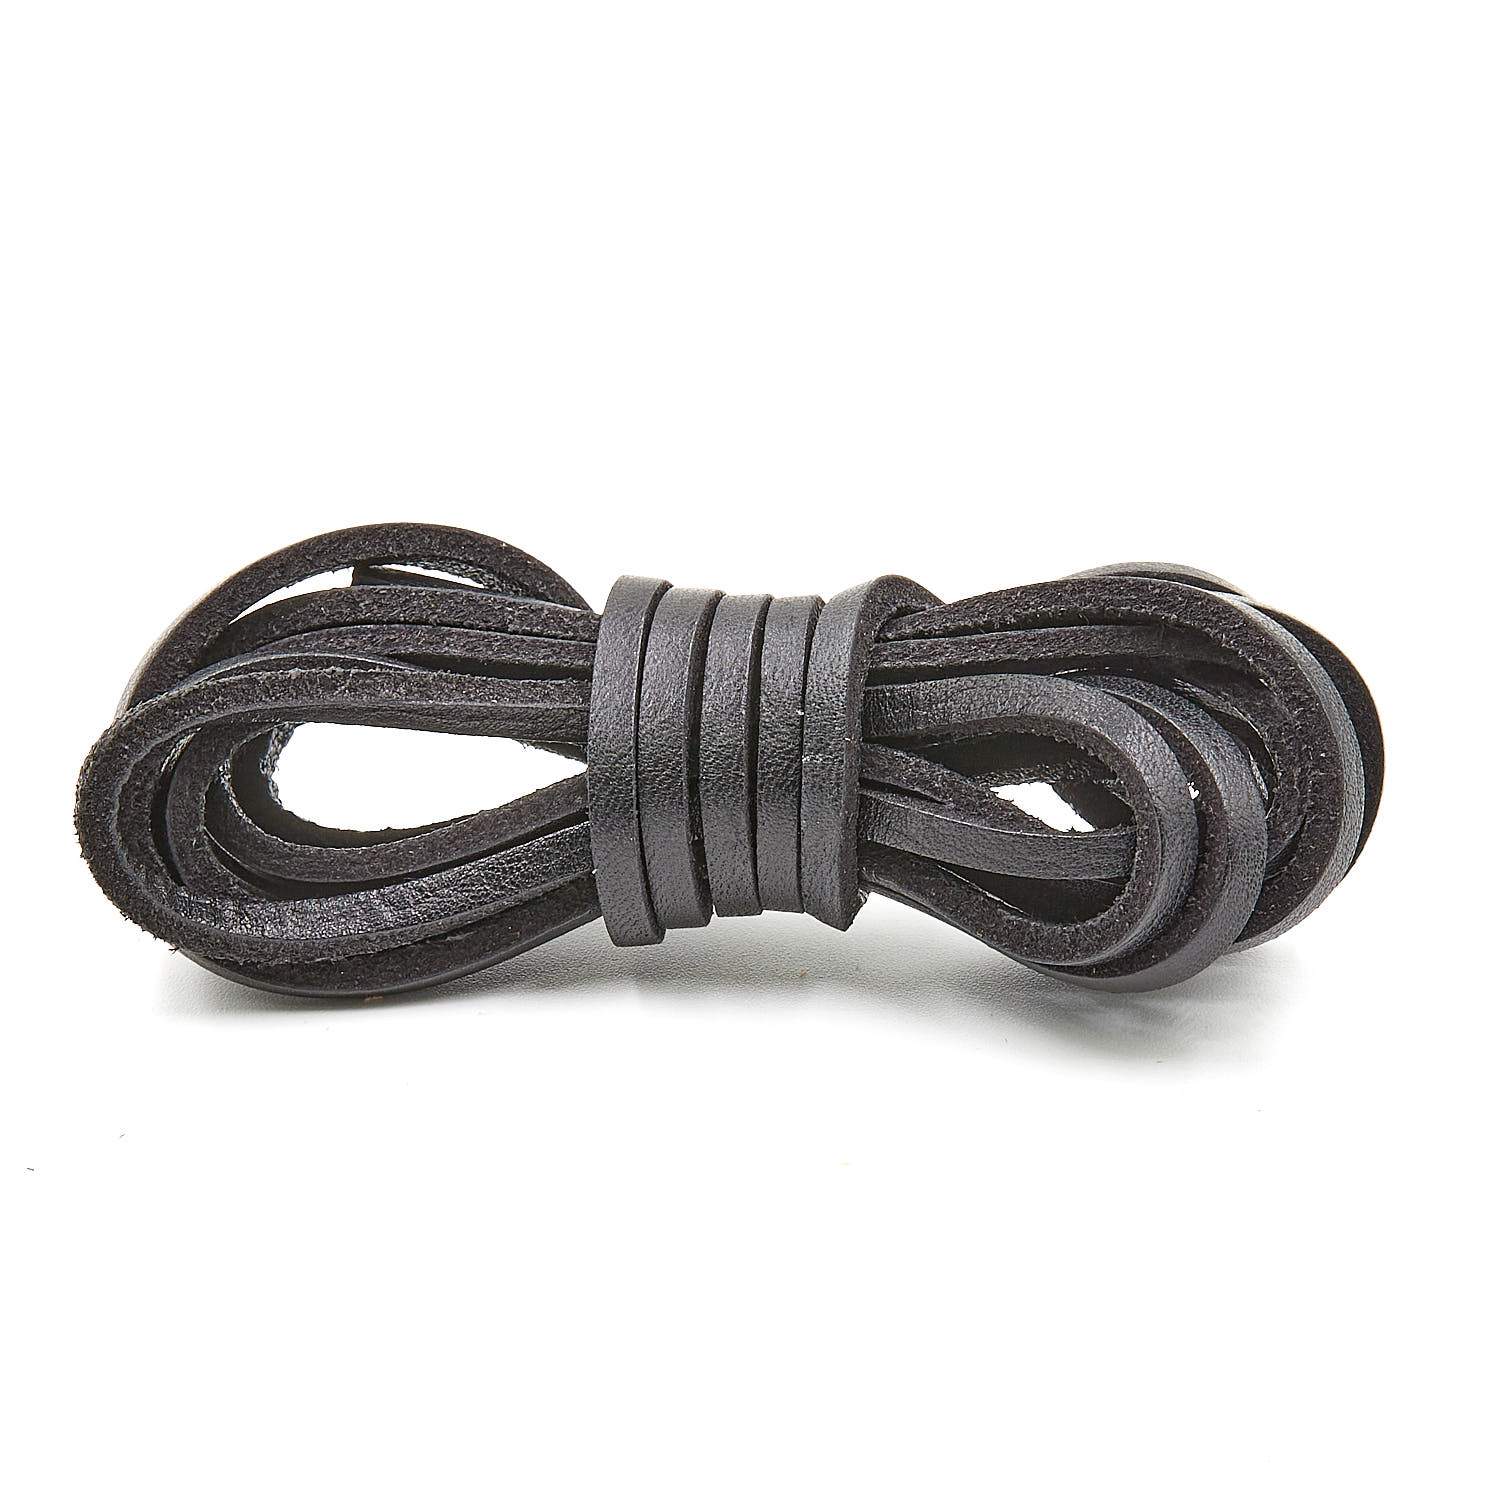 Gaucho Goods (72)" Flat Leather Laces Braided Cord (3mm) - Gaucho Goods